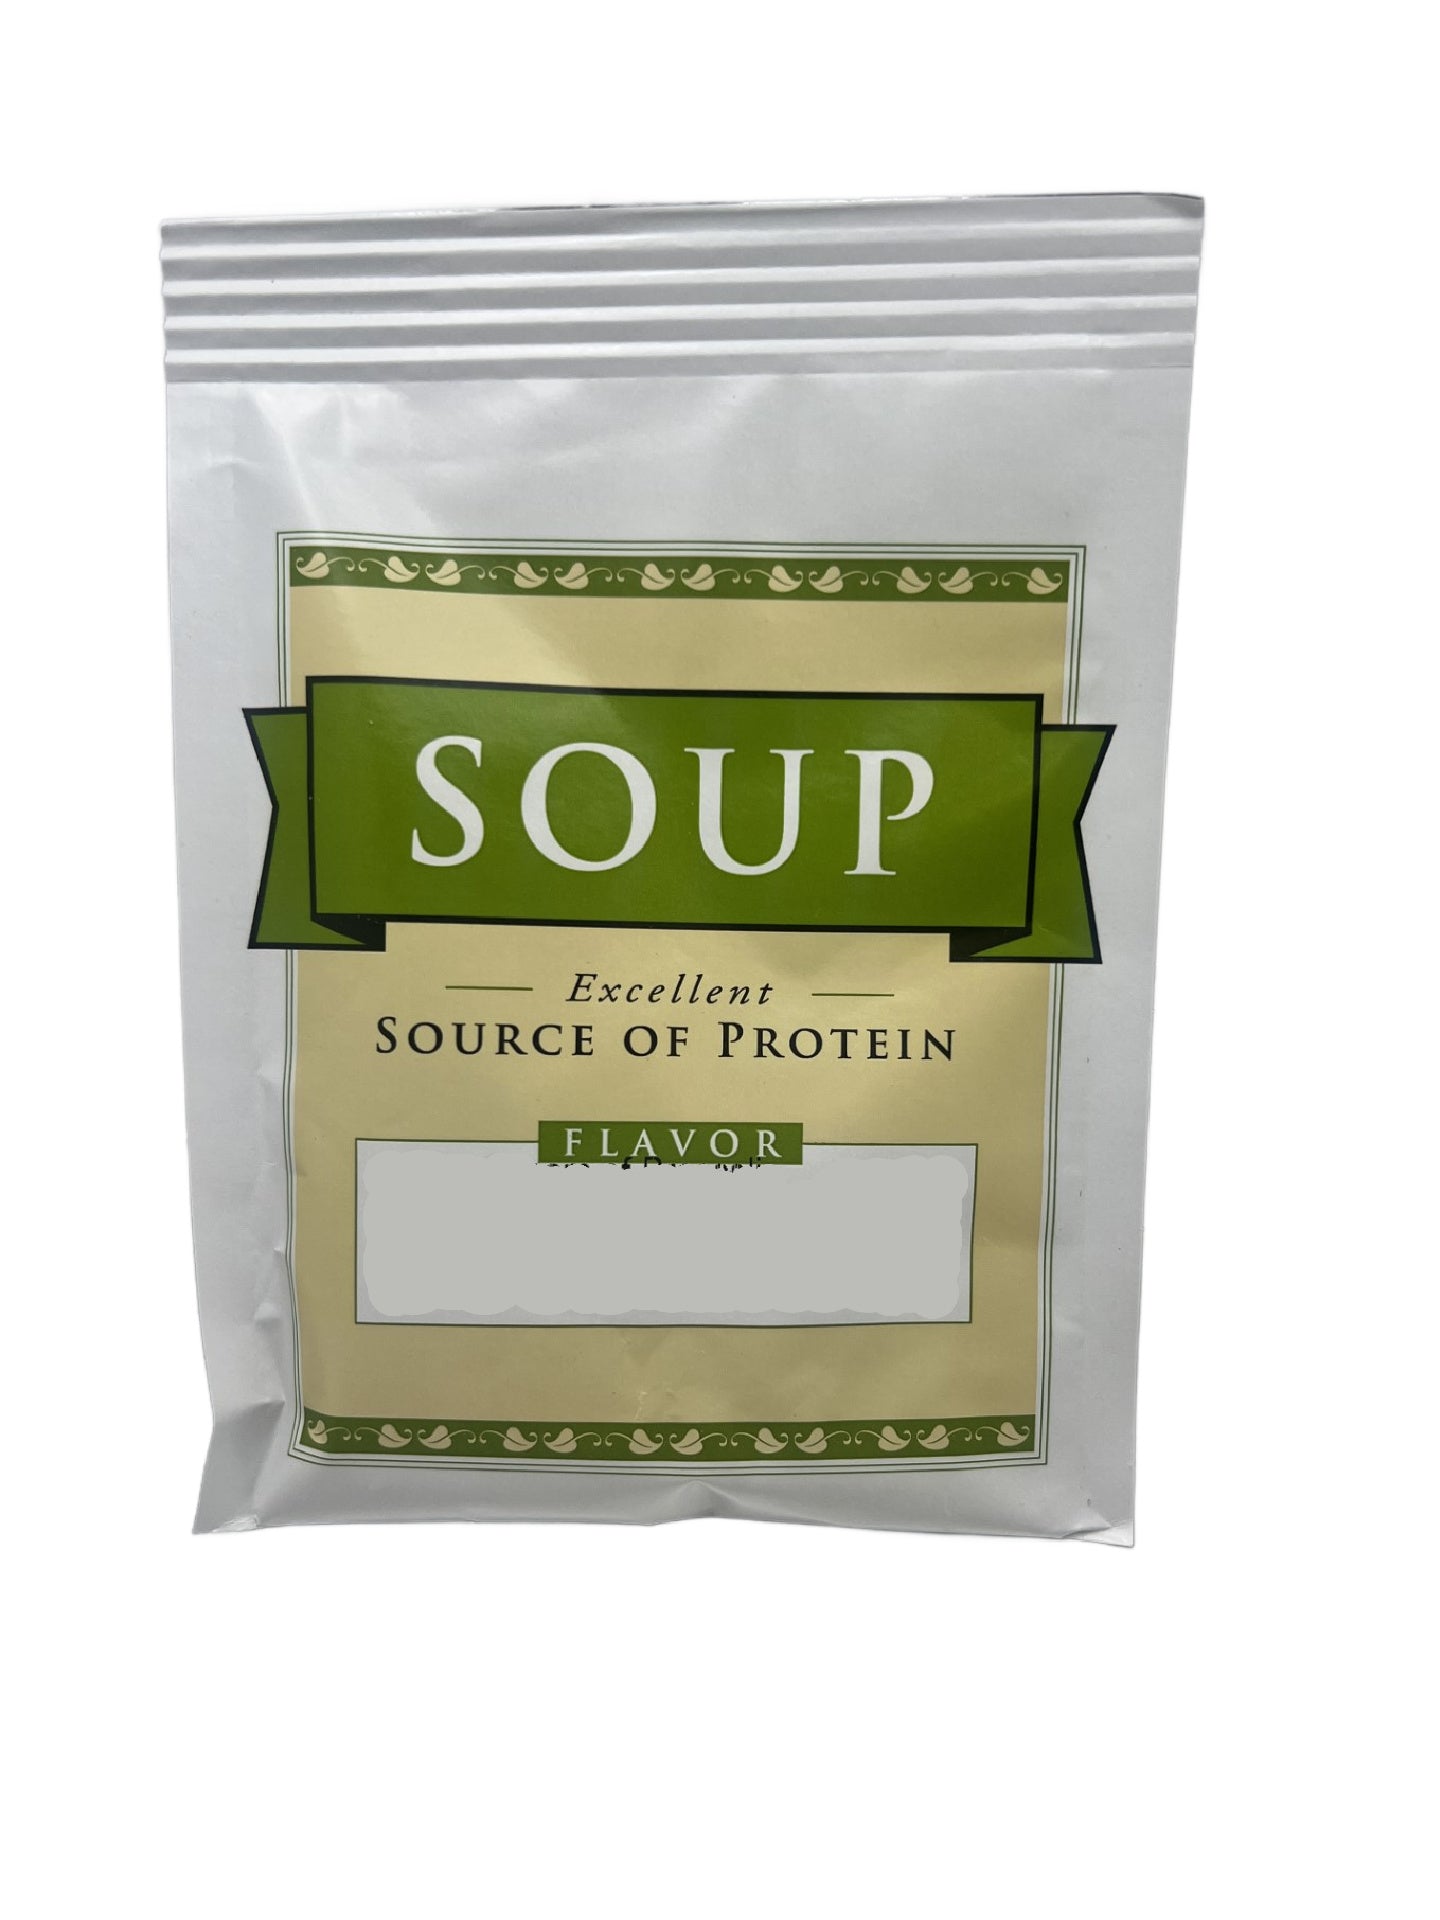 NutriWise Chicken Tortilla Meal Replacement Soup (7/Box)